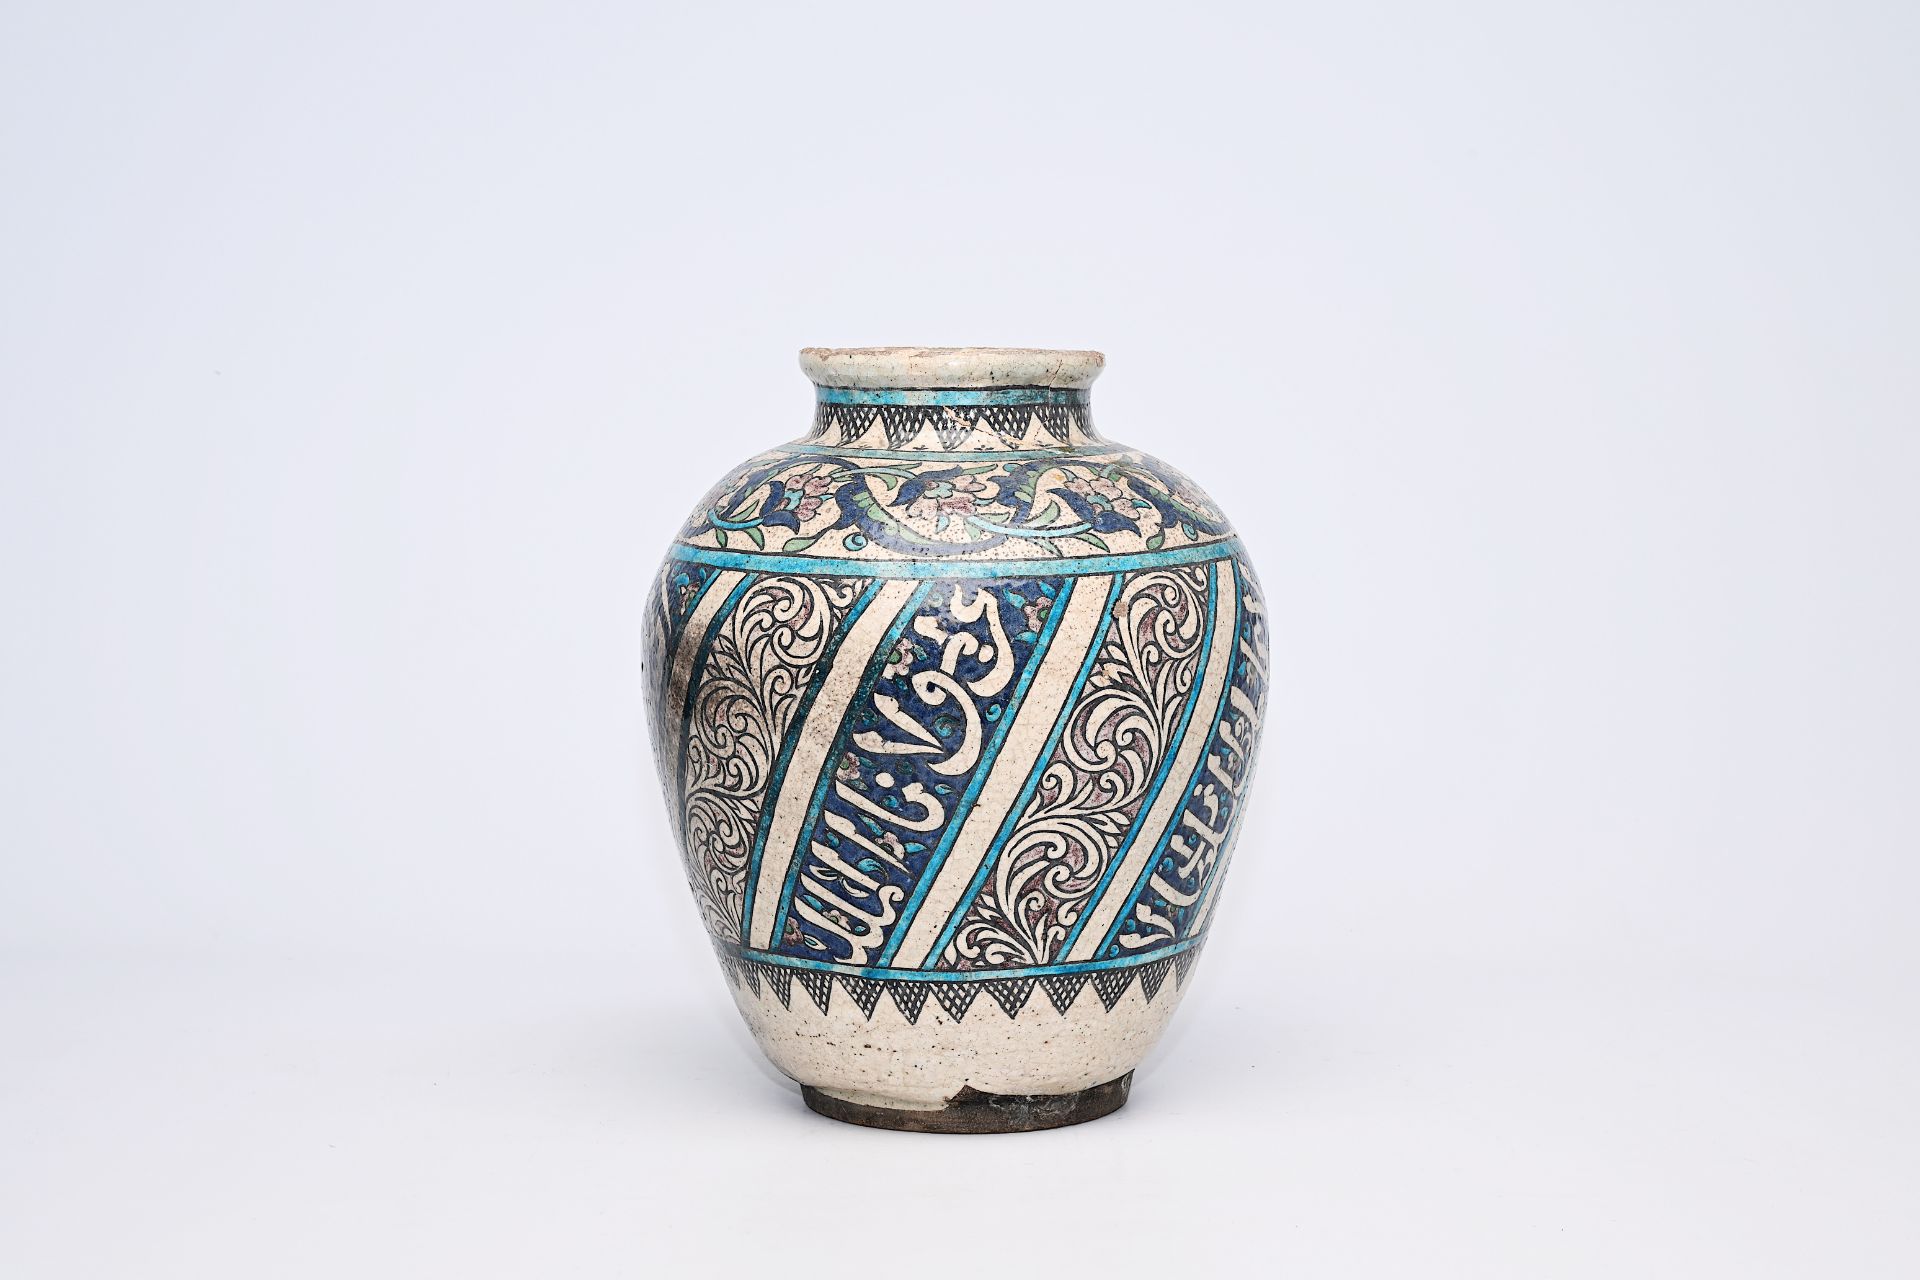 A polychrome pottery jar with floral and calligraphic design, Iran, 19th C. - Image 3 of 9